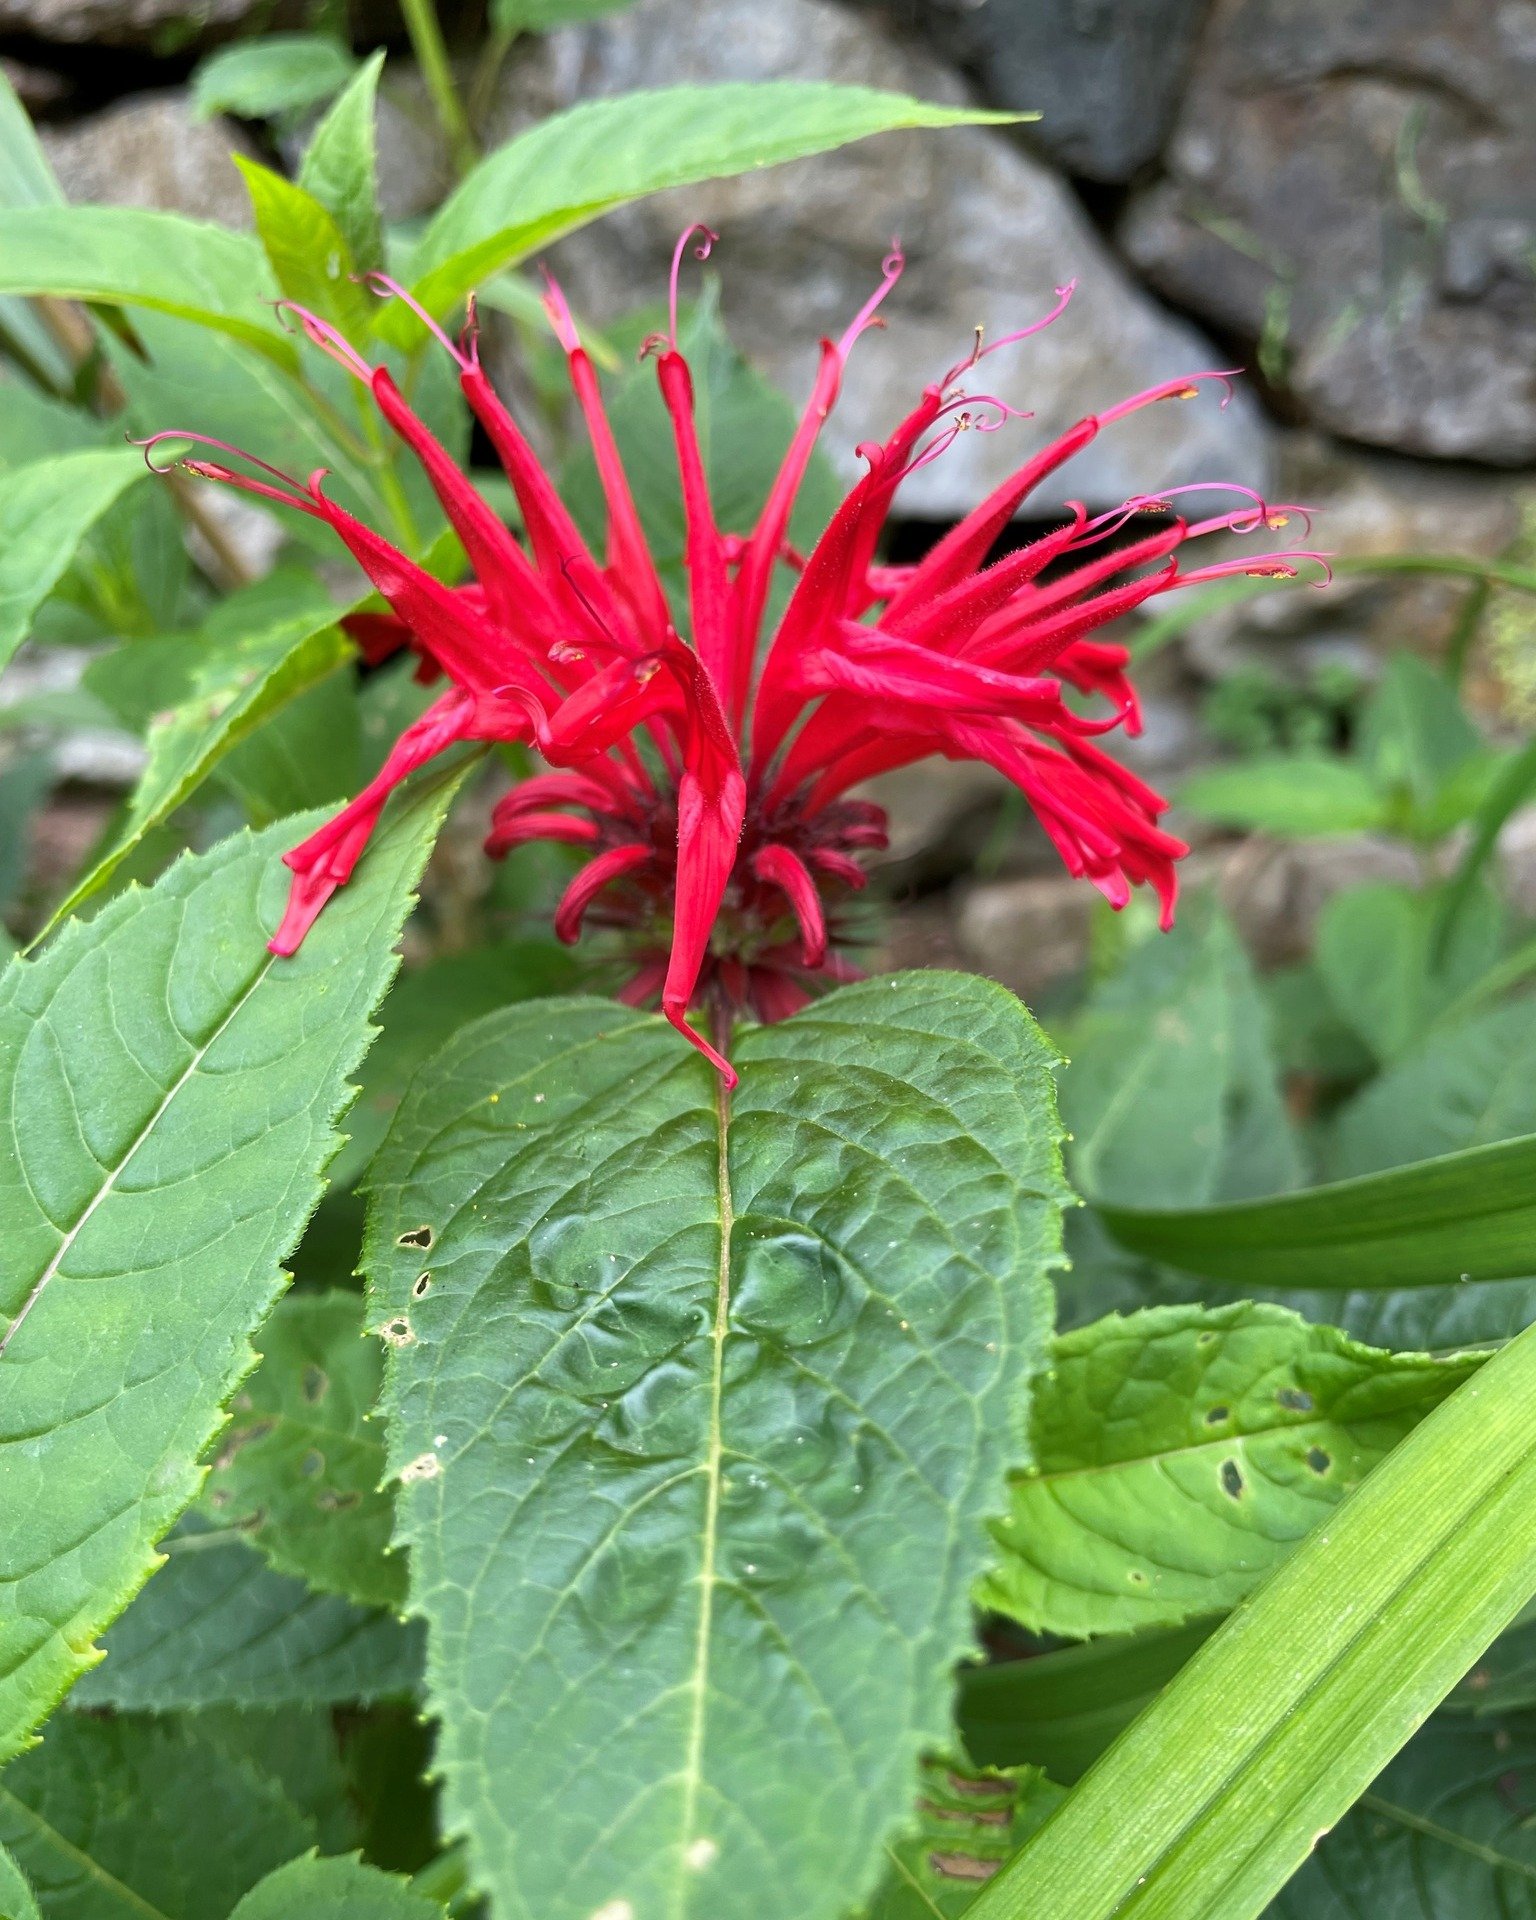 Flora Friday!
Bee Balm (Monarda &lsquo;Gardenview Scarlet&rsquo;) is another pollinator friendly plant selected for the gardens opposite Caves House.

This lovely perennial plant will die down once the frosts come (making way for the daffodils) and t